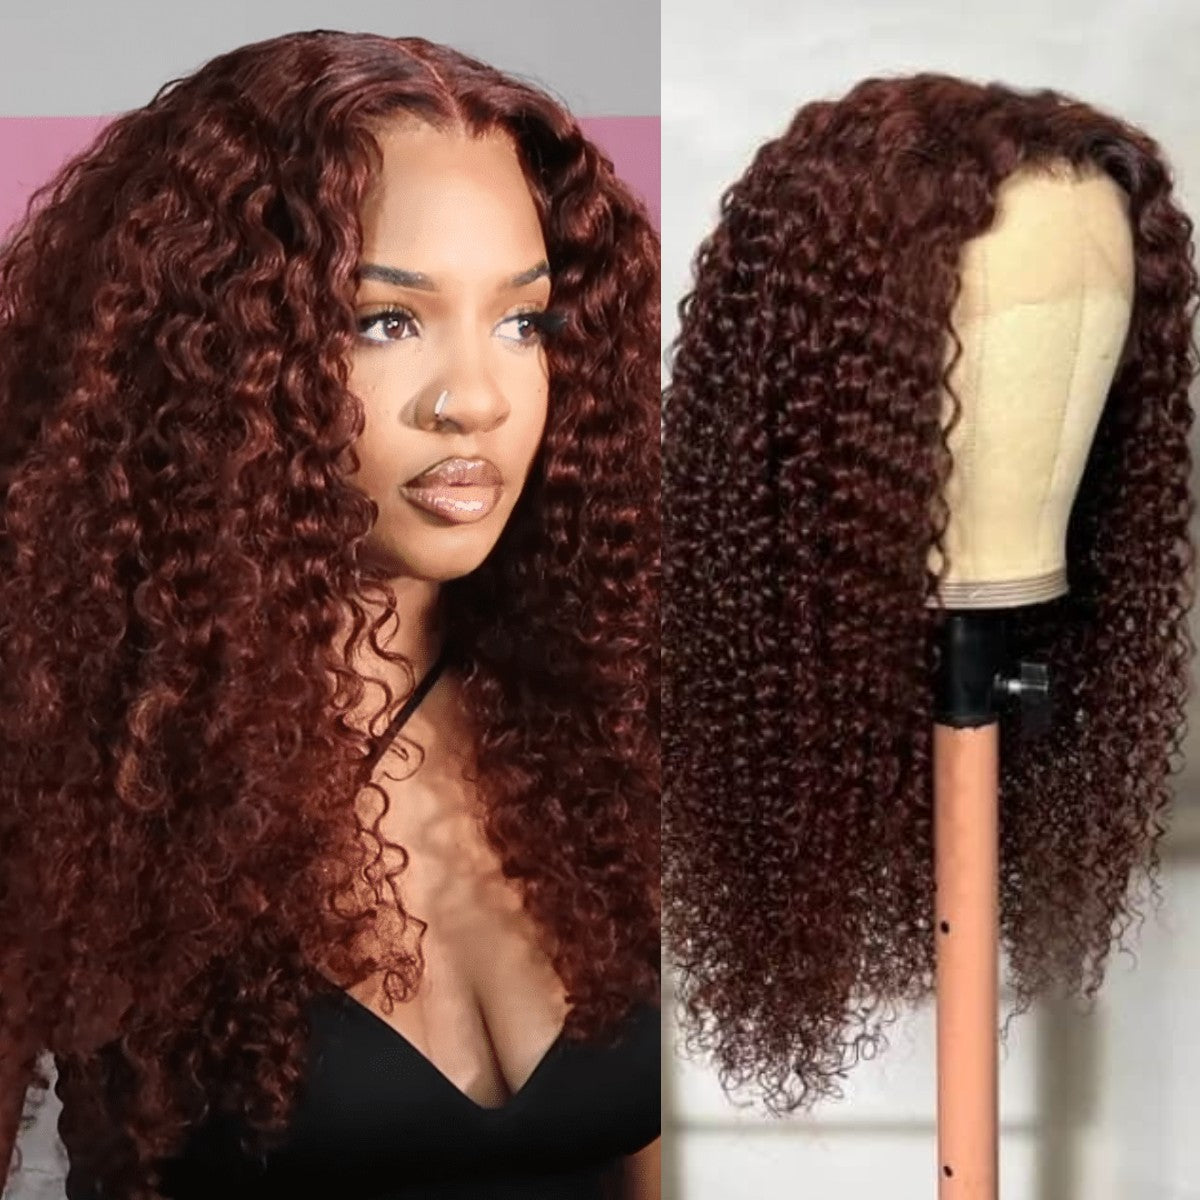 ASPECIALUNIT - Auburn Brown Curly 13x6 Glueless Lace Front Wig - SPE018